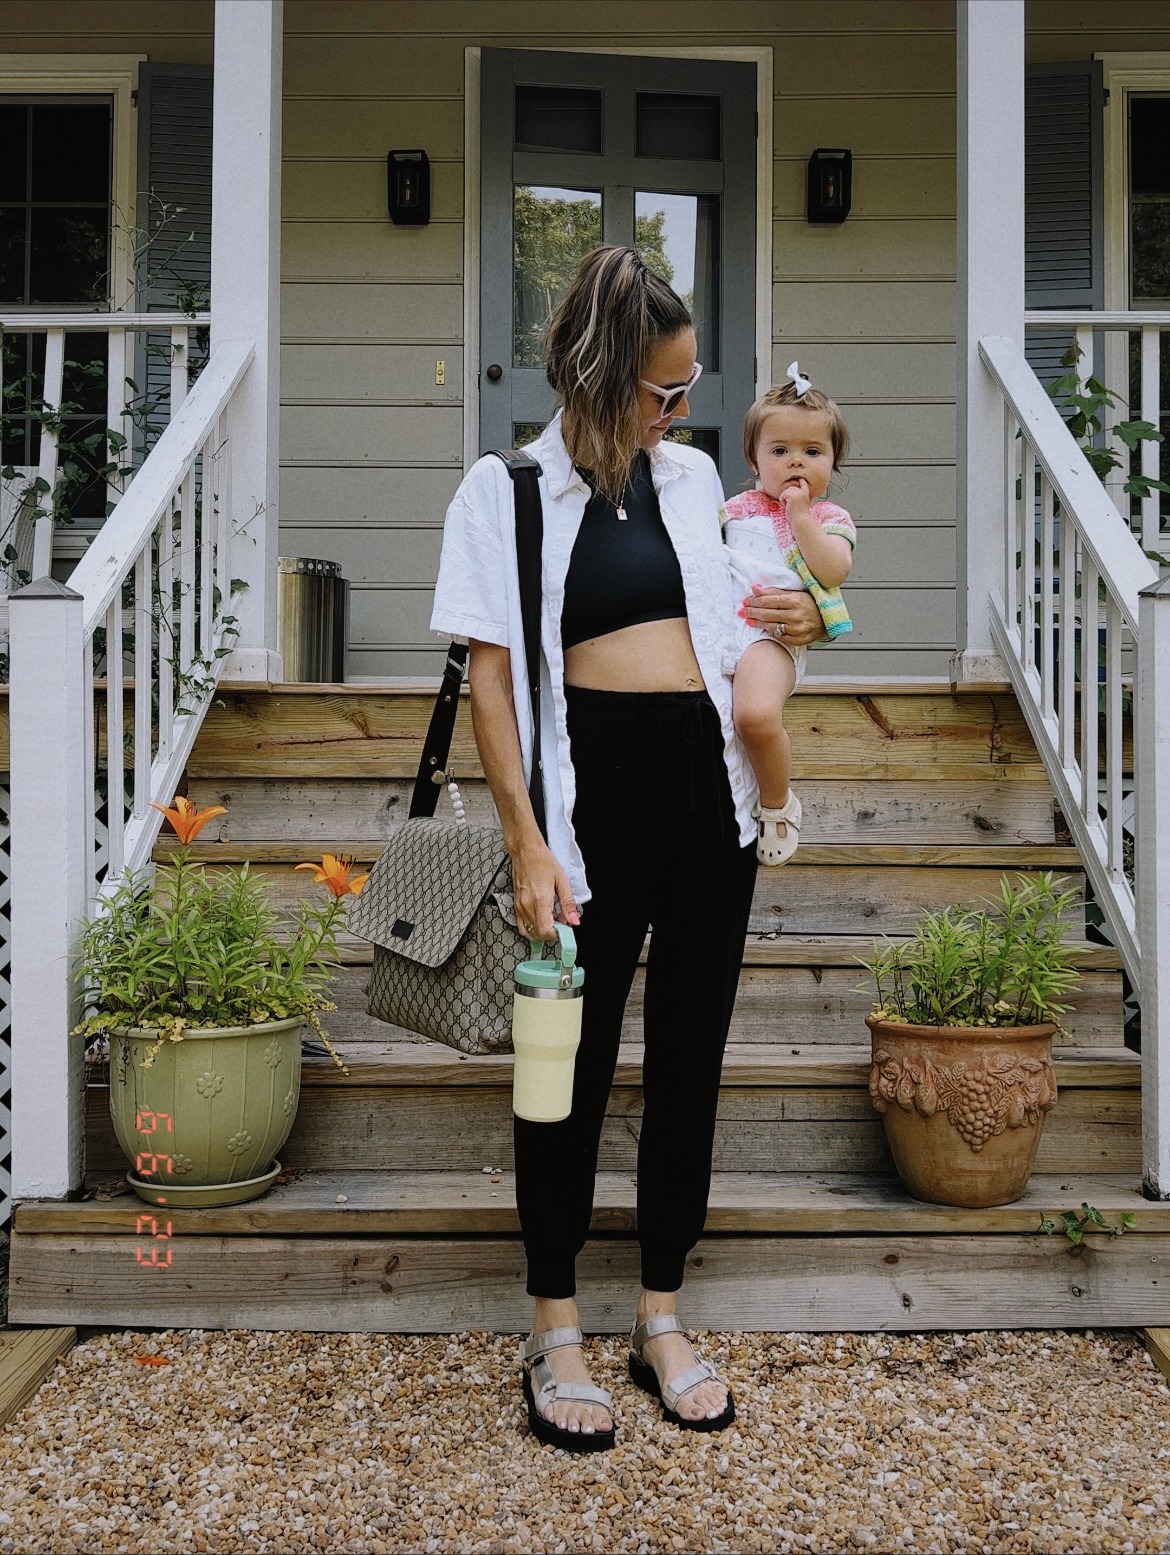 Best Designer Tote Bags for Fashionable Moms - cathclaire